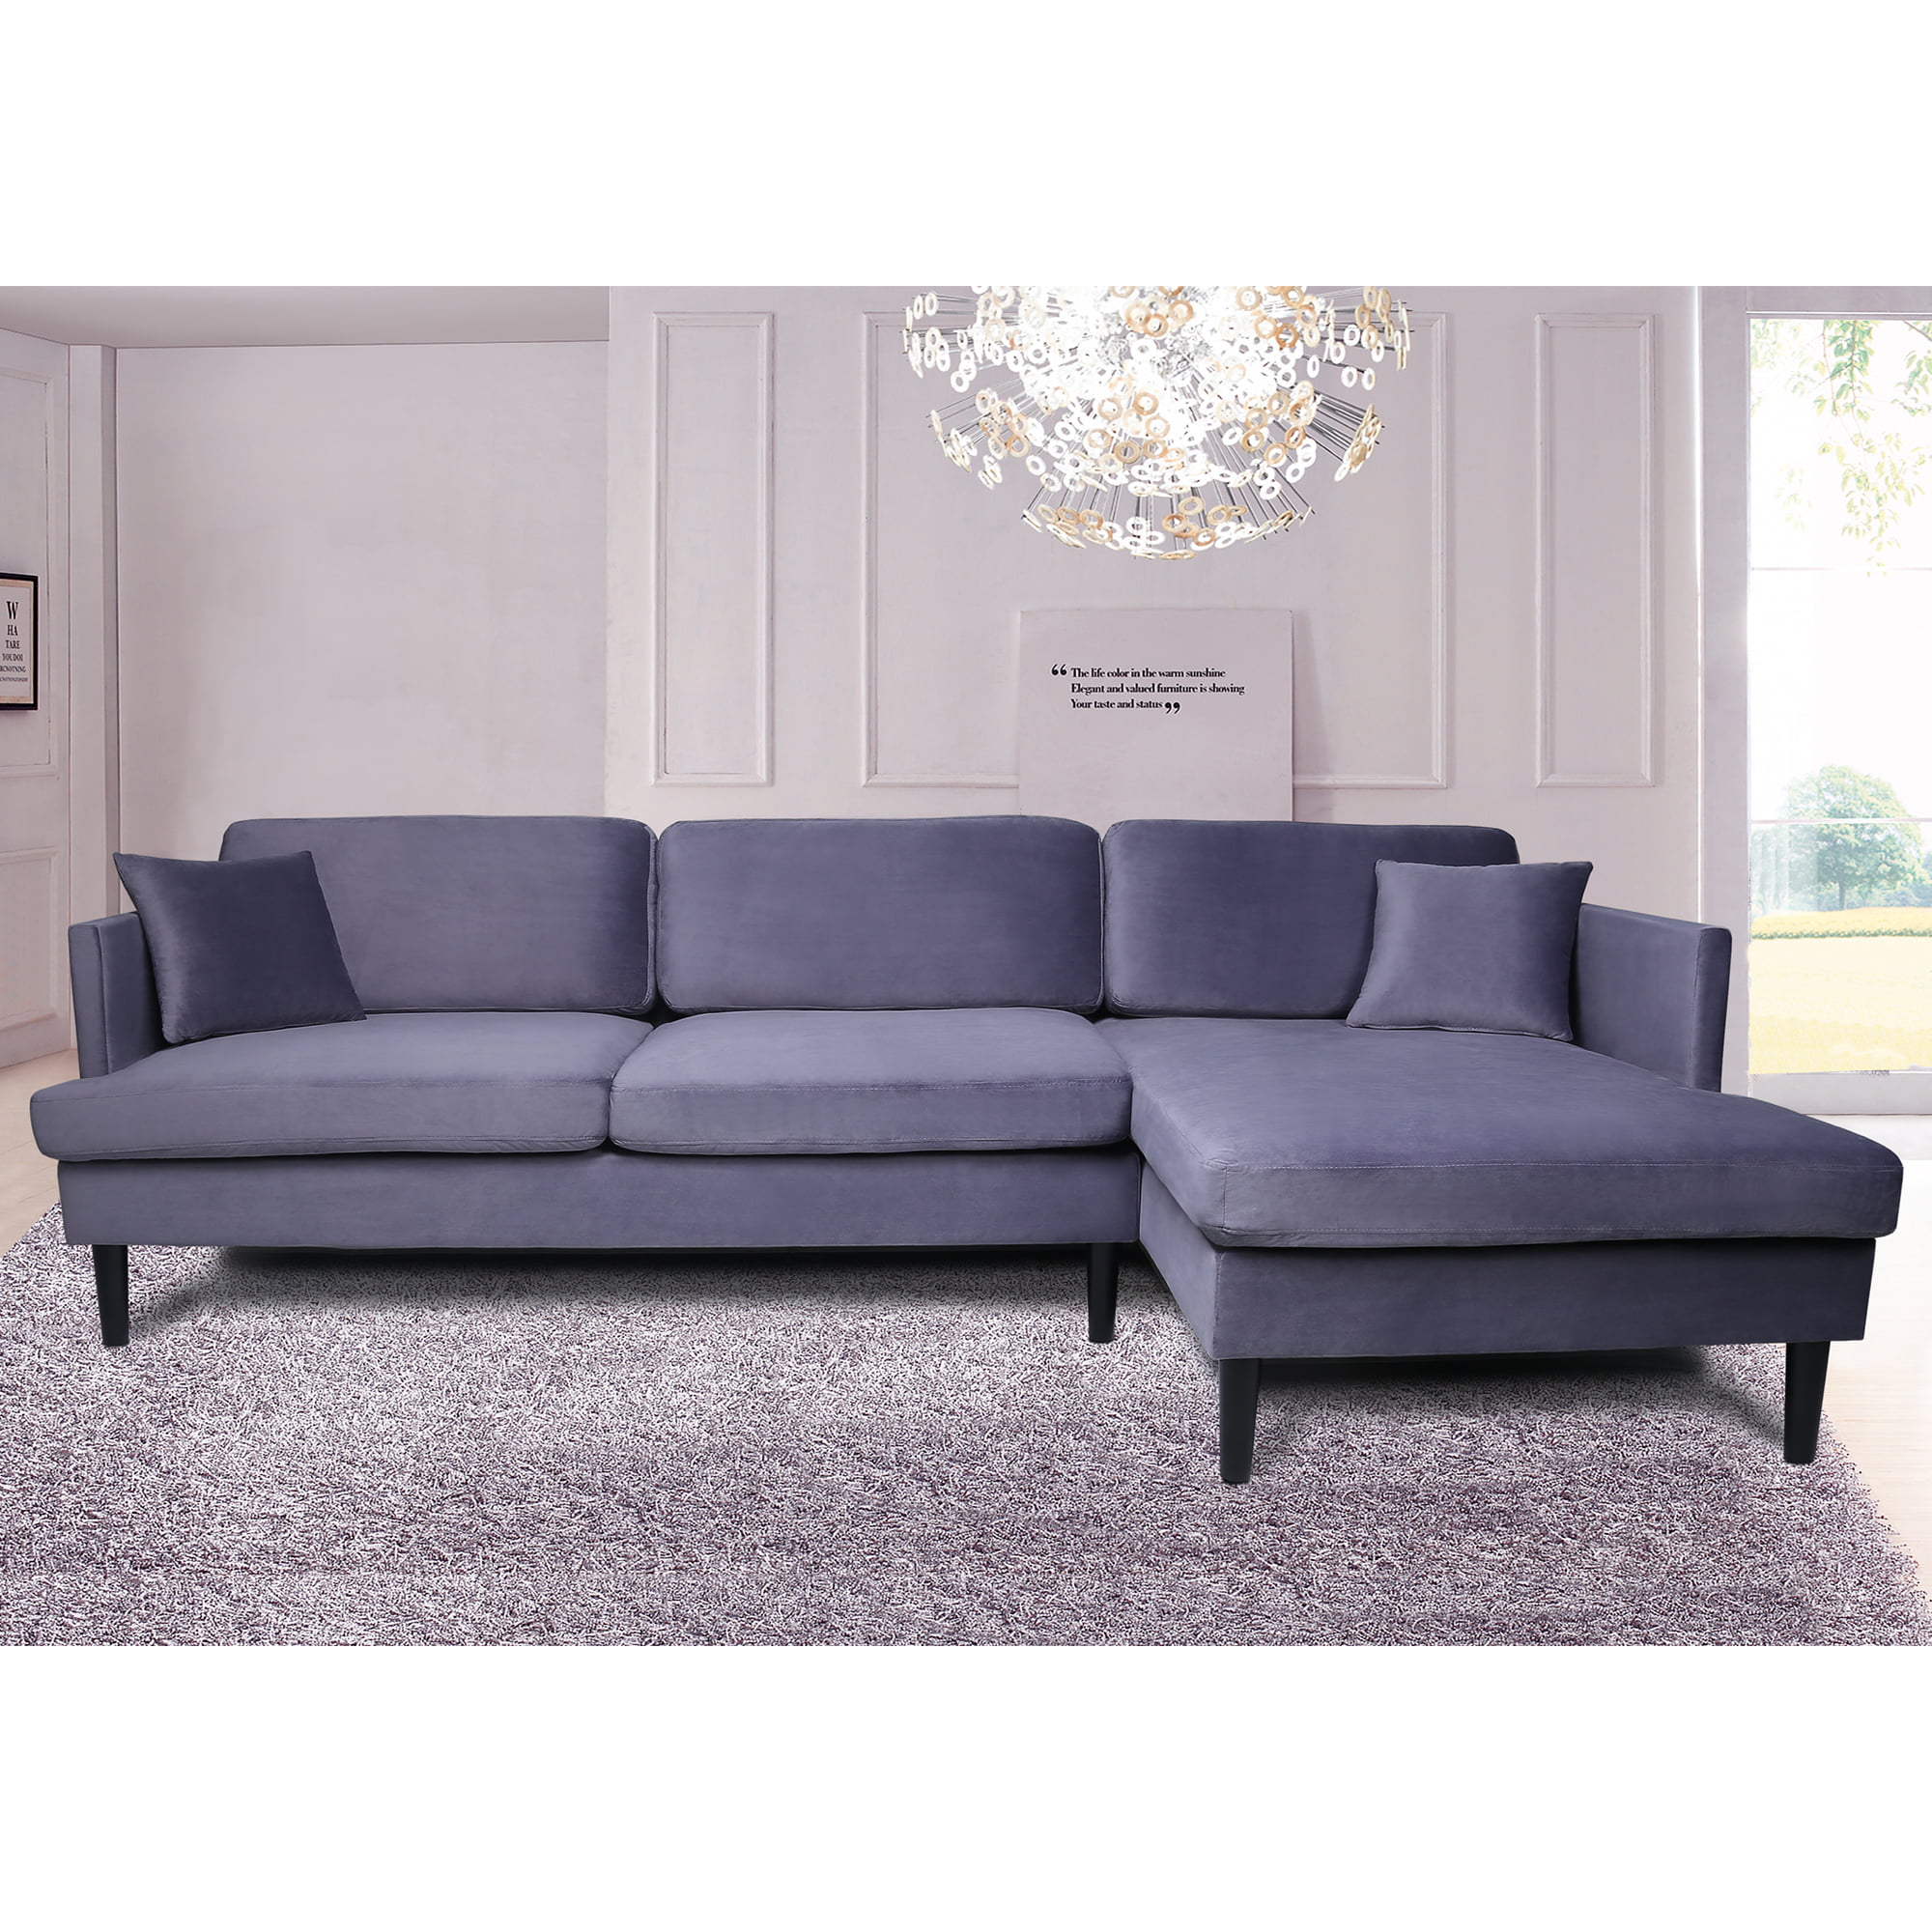 Clearance! Living Room Sectional Sofa Couch with L Shape